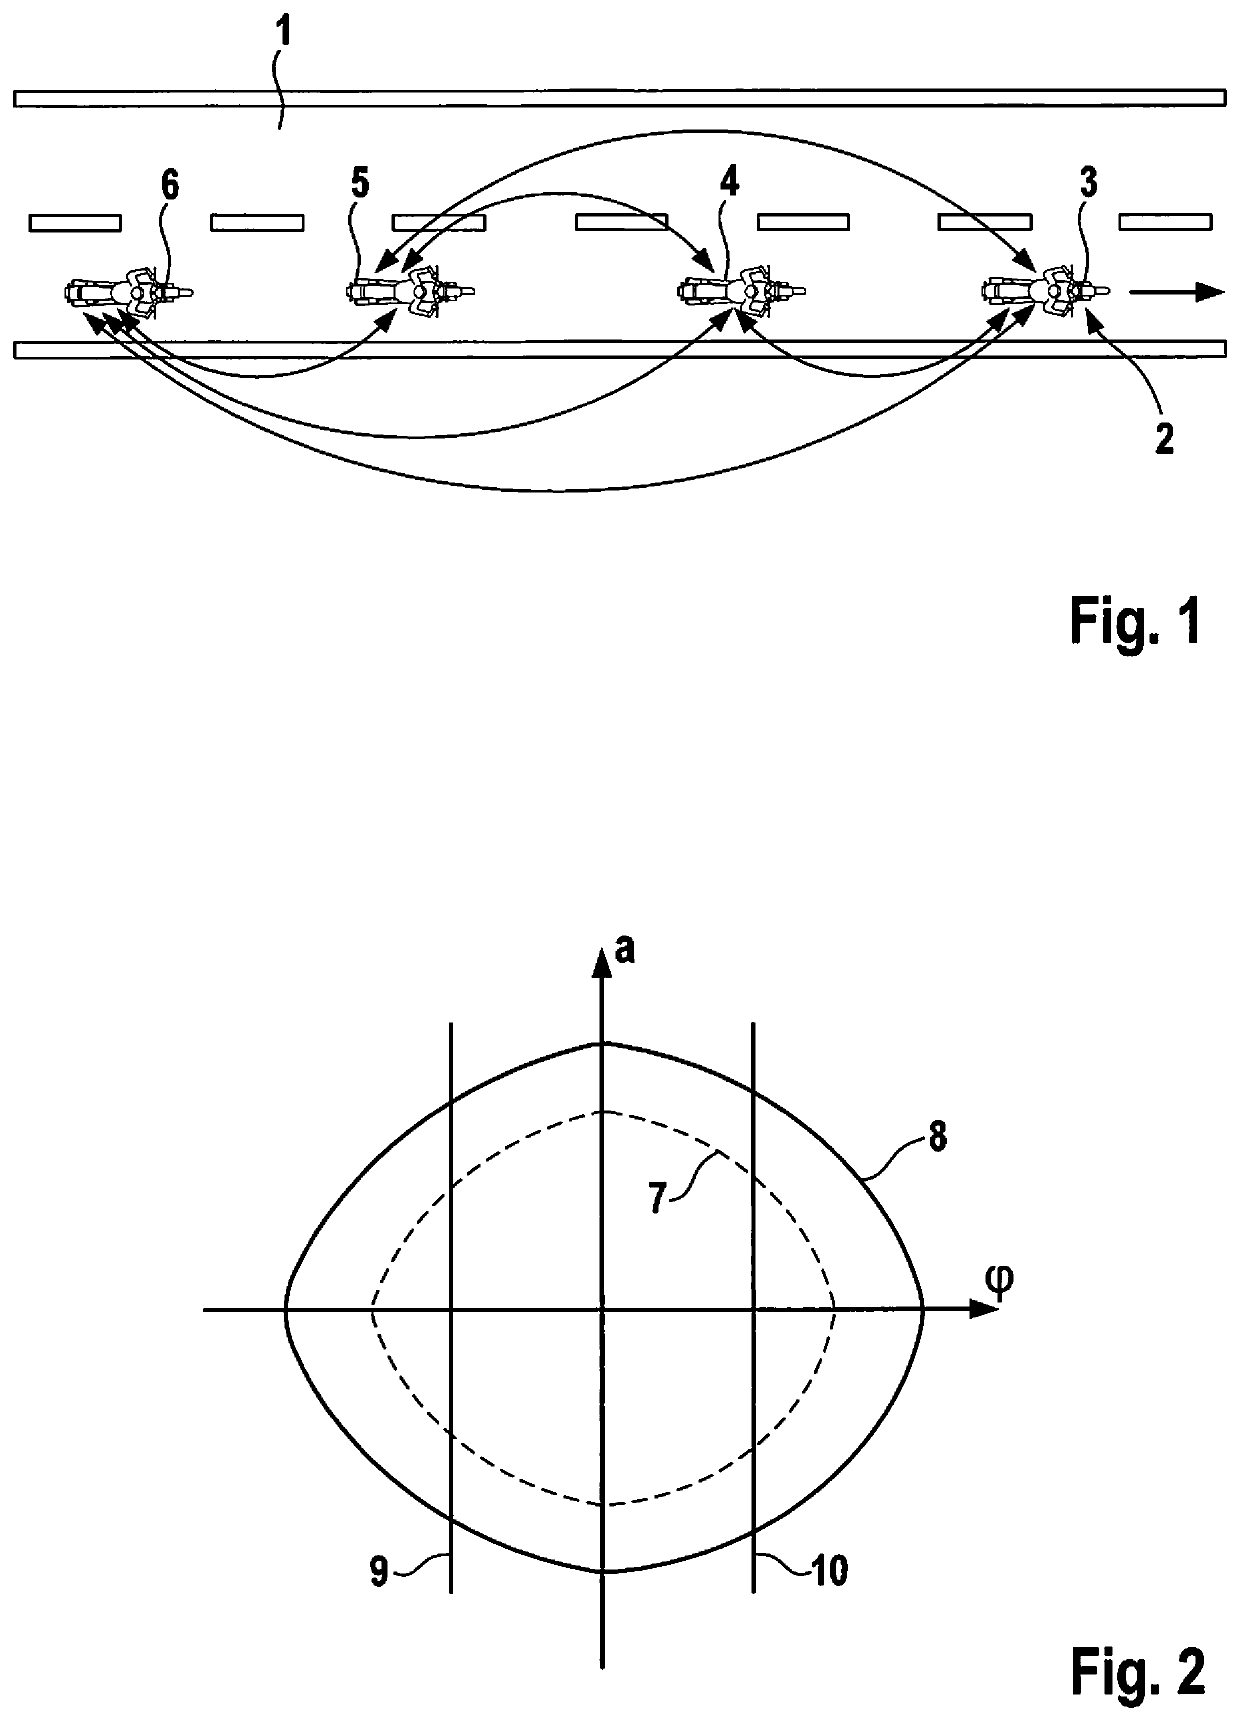 Method for improving driving safety when vehicles are traveling in convoy